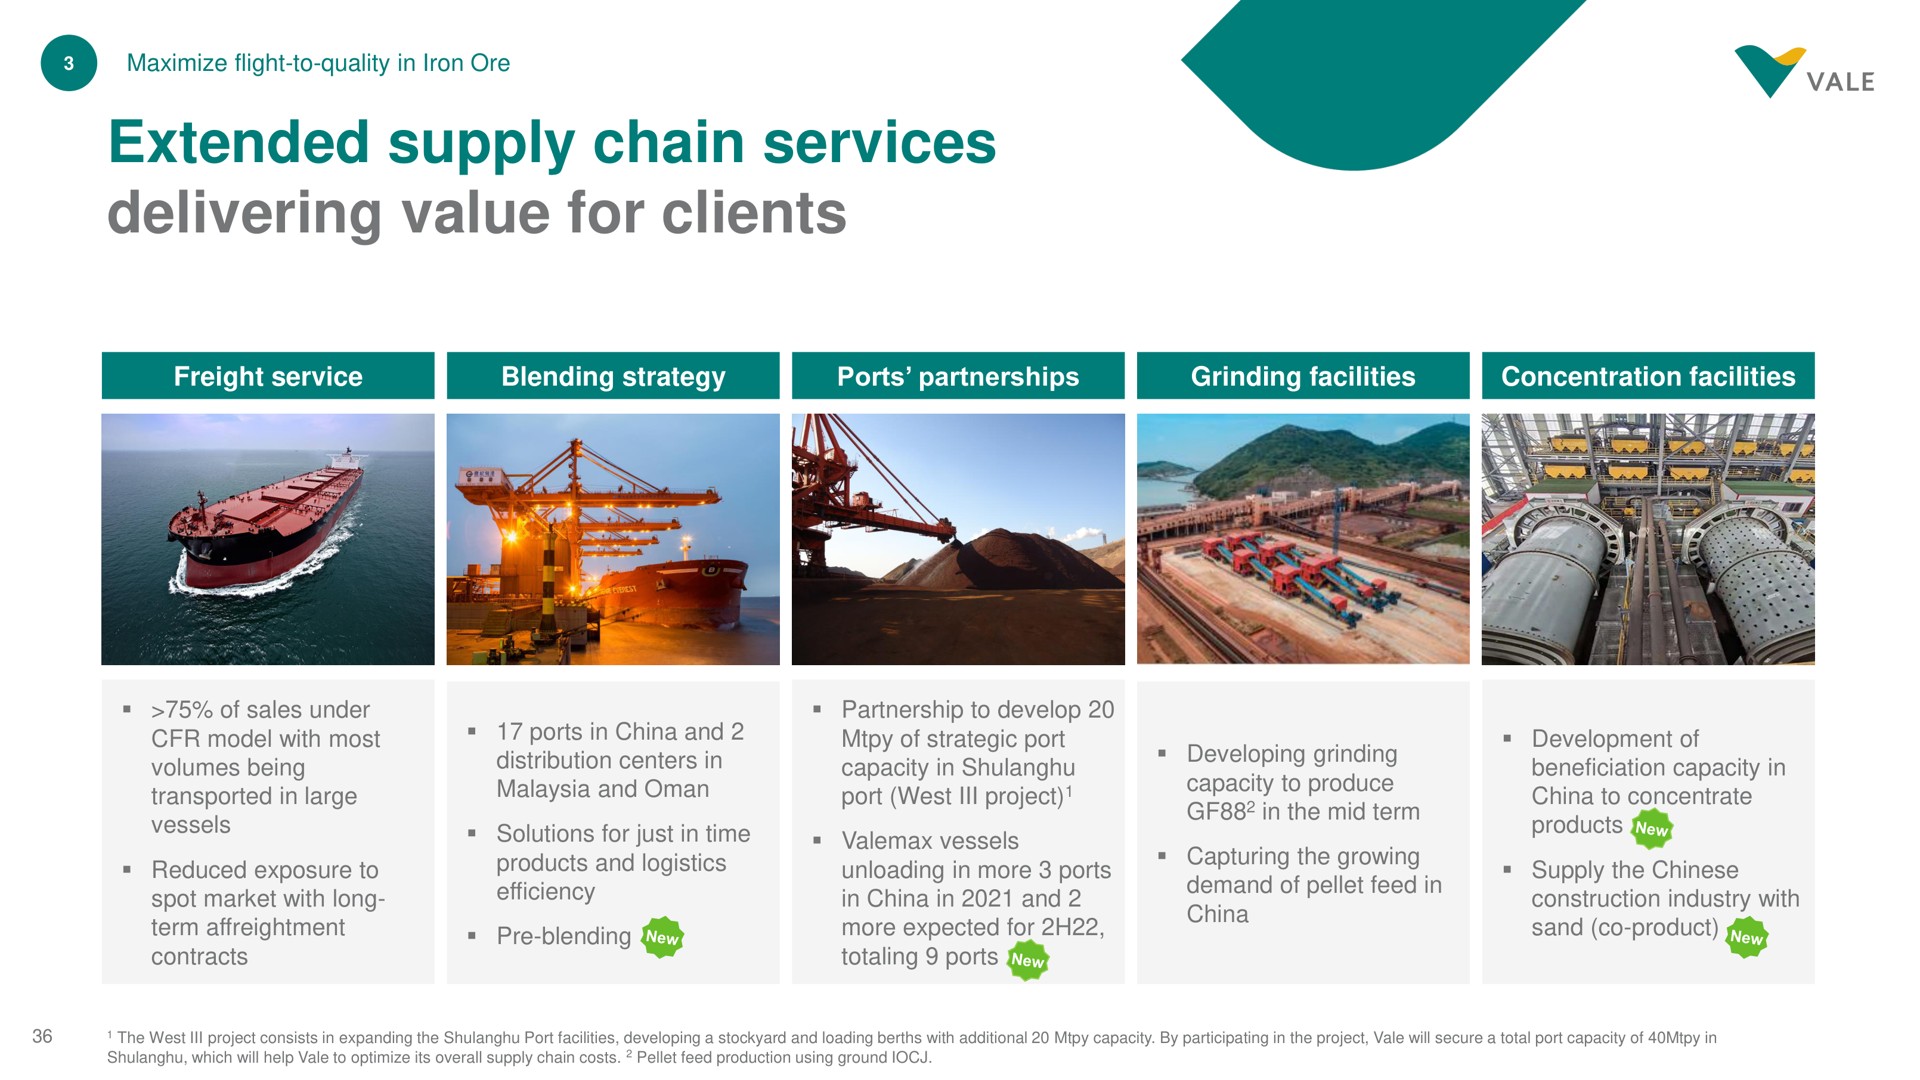 extended supply chain services delivering value for clients | Vale